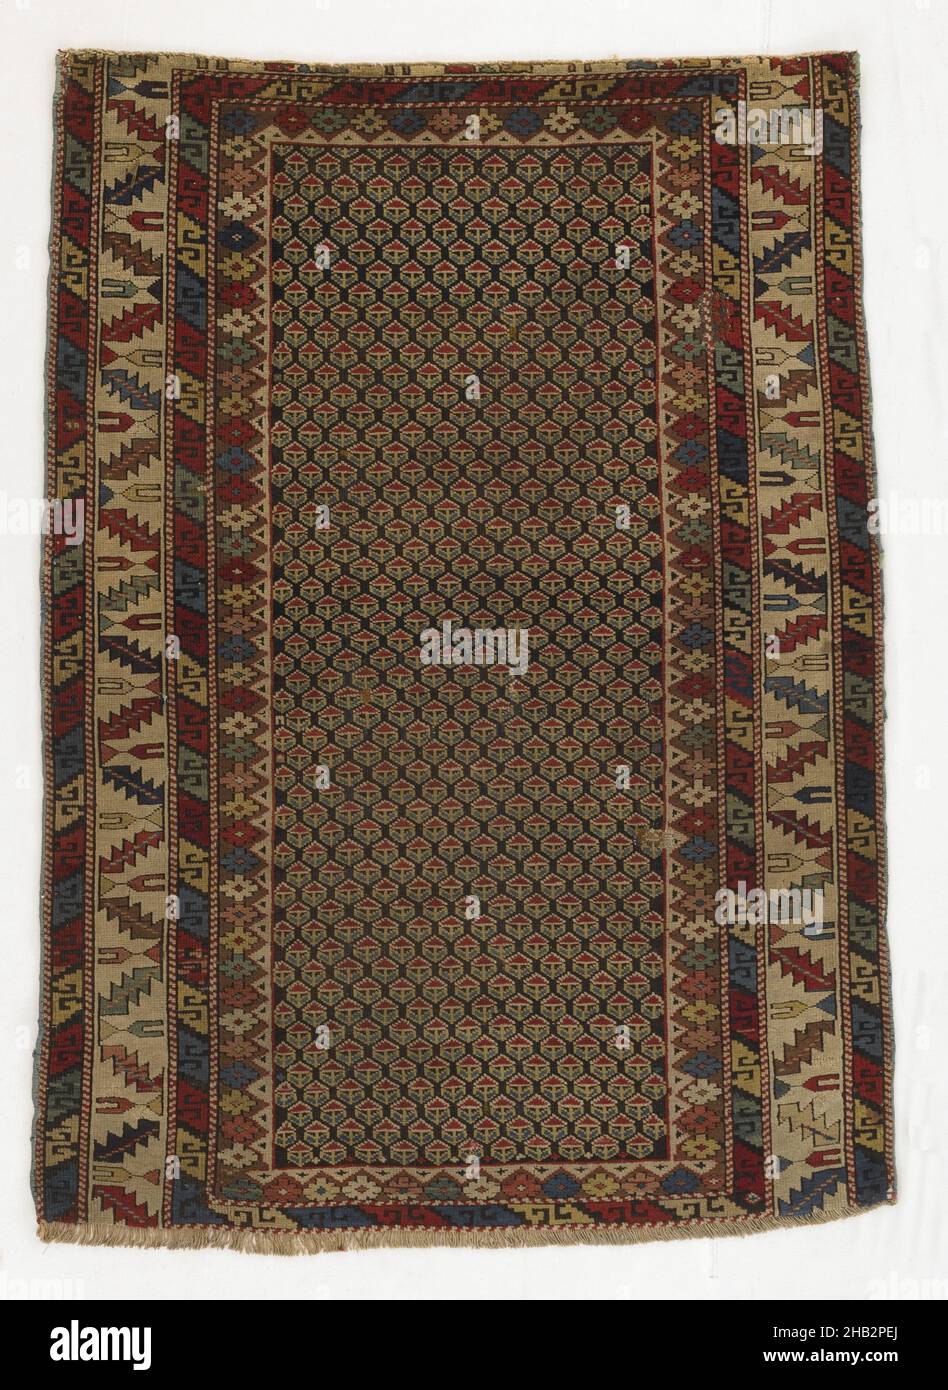 Shirvan Carpet with Field of Staggered Rows of Small Motifs, Transcaucasian, late 19th century, Wool, Made in Caucasus, Azerbaijan, Asia, Coverings & hangings, textiles, 50 1/2 x 36 1/2 in. (128.3 x 92.7 cm Stock Photo